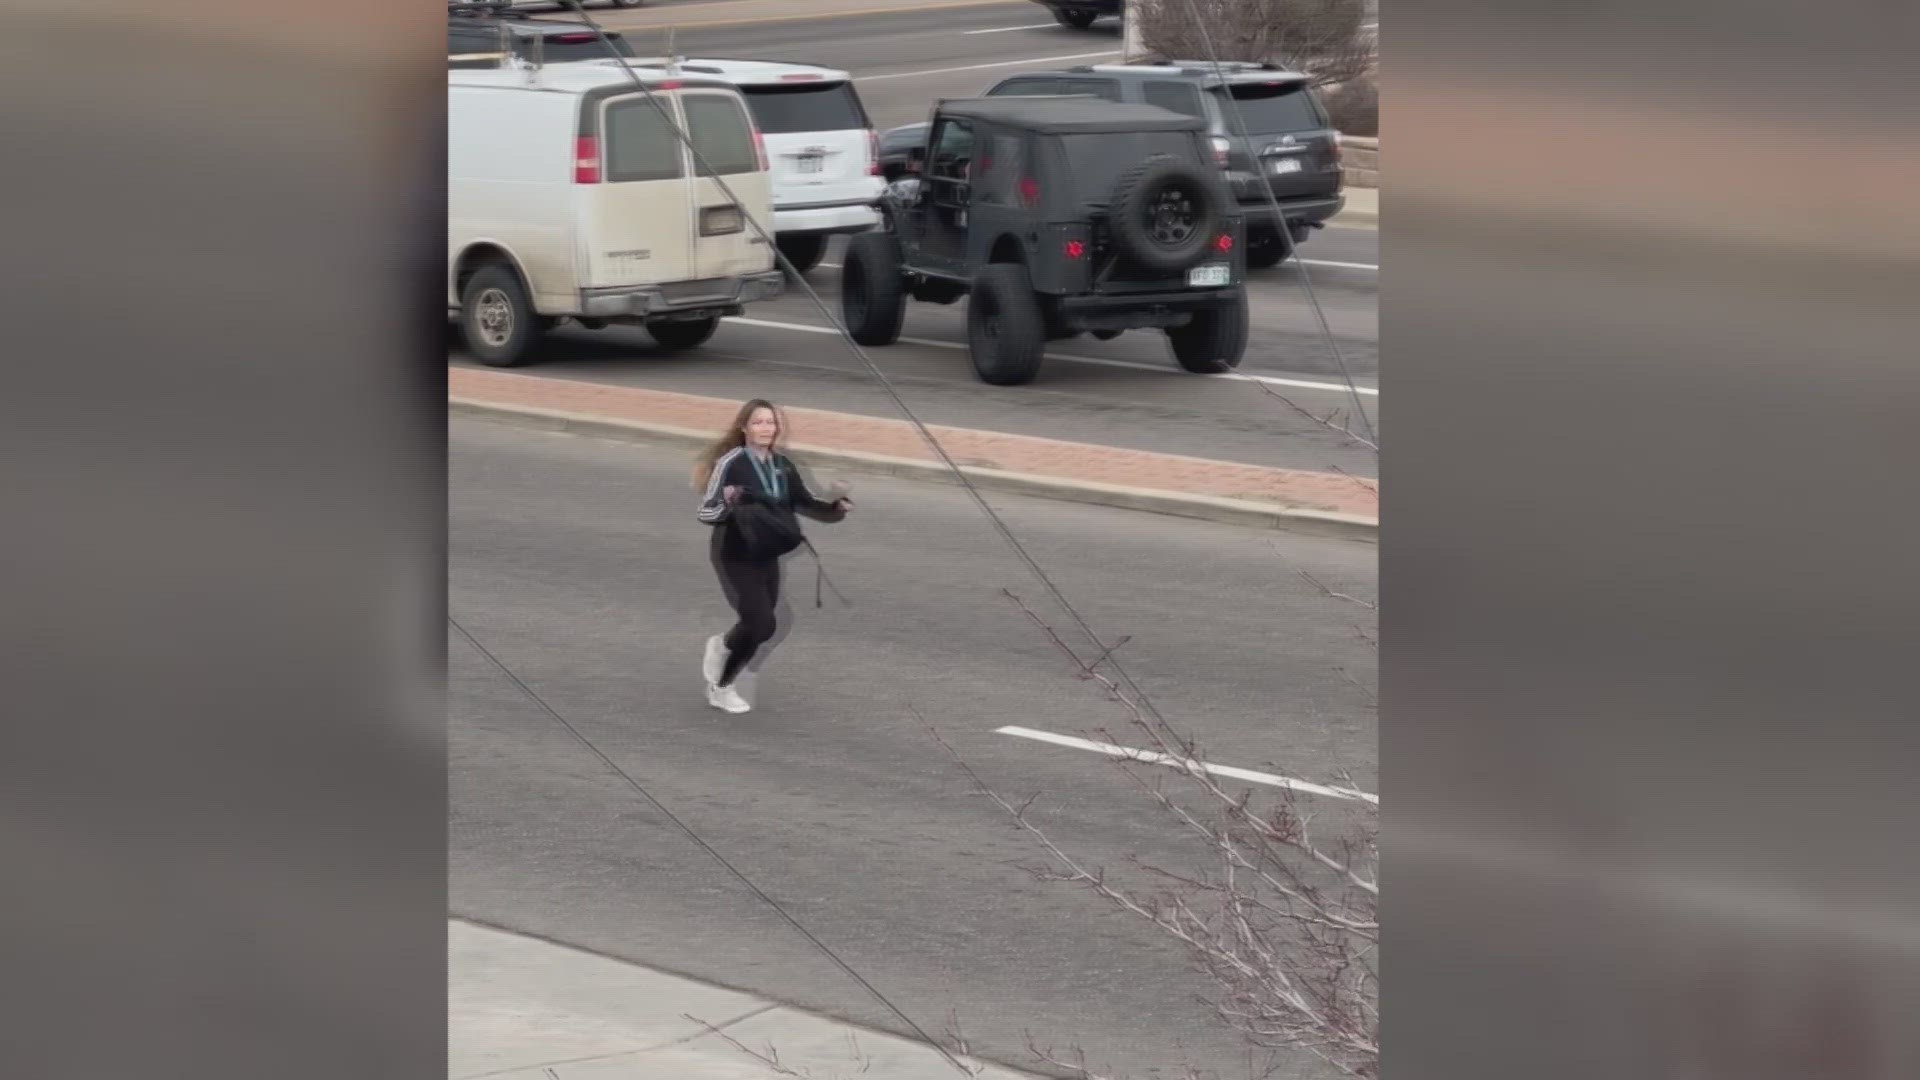 Police records obtained by 9NEWS reveal the woman seen in viral TikTok videos had an active warrant for another hit and run.